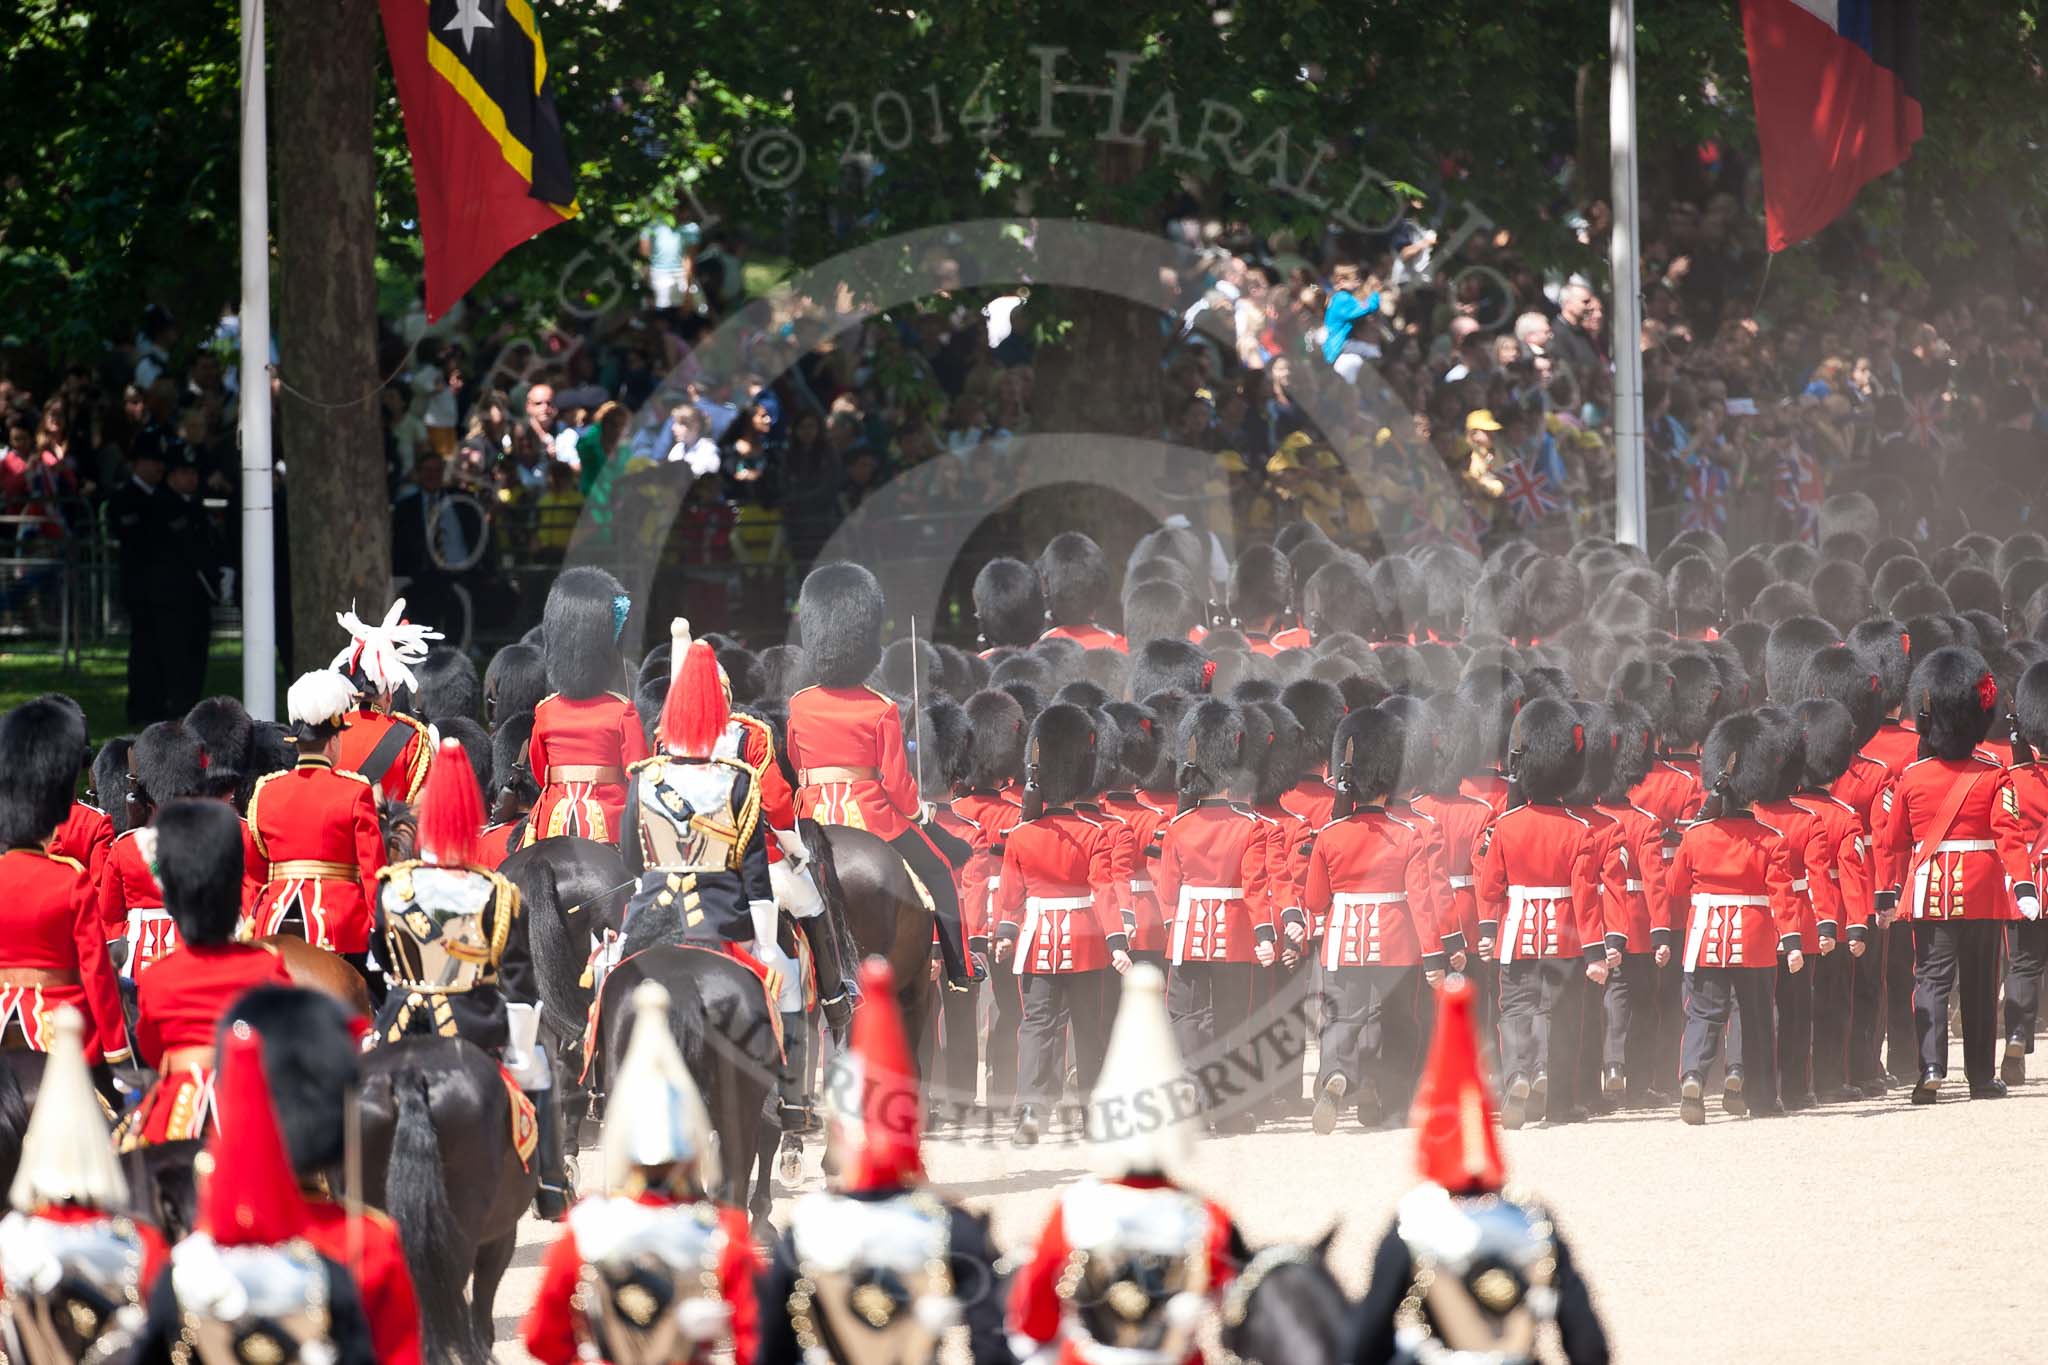 Trooping the Colour 2009: March Off - the footguards disappearing in a cloud of dust, followed by the 'rear part' of the Royal Procession..
Horse Guards Parade, Westminster,
London SW1,

United Kingdom,
on 13 June 2009 at 12:15, image #270